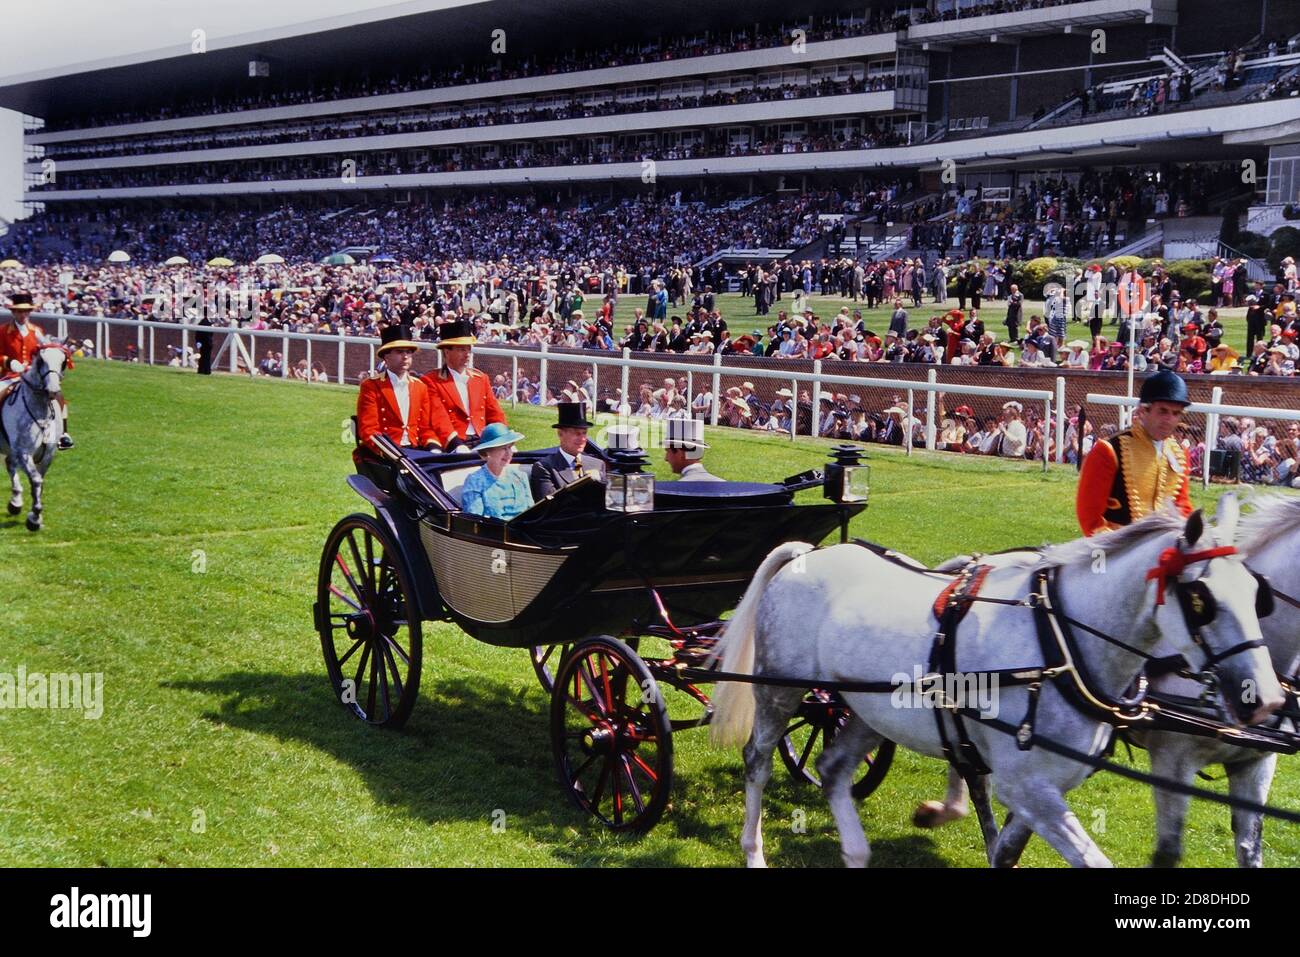 HM Queen Elizabeth II and Prince Philip Duke of Edinburgh arriving at Royal Ascot races in a royal carriage, landaus. Berkshire, England. 1989 Stock Photo